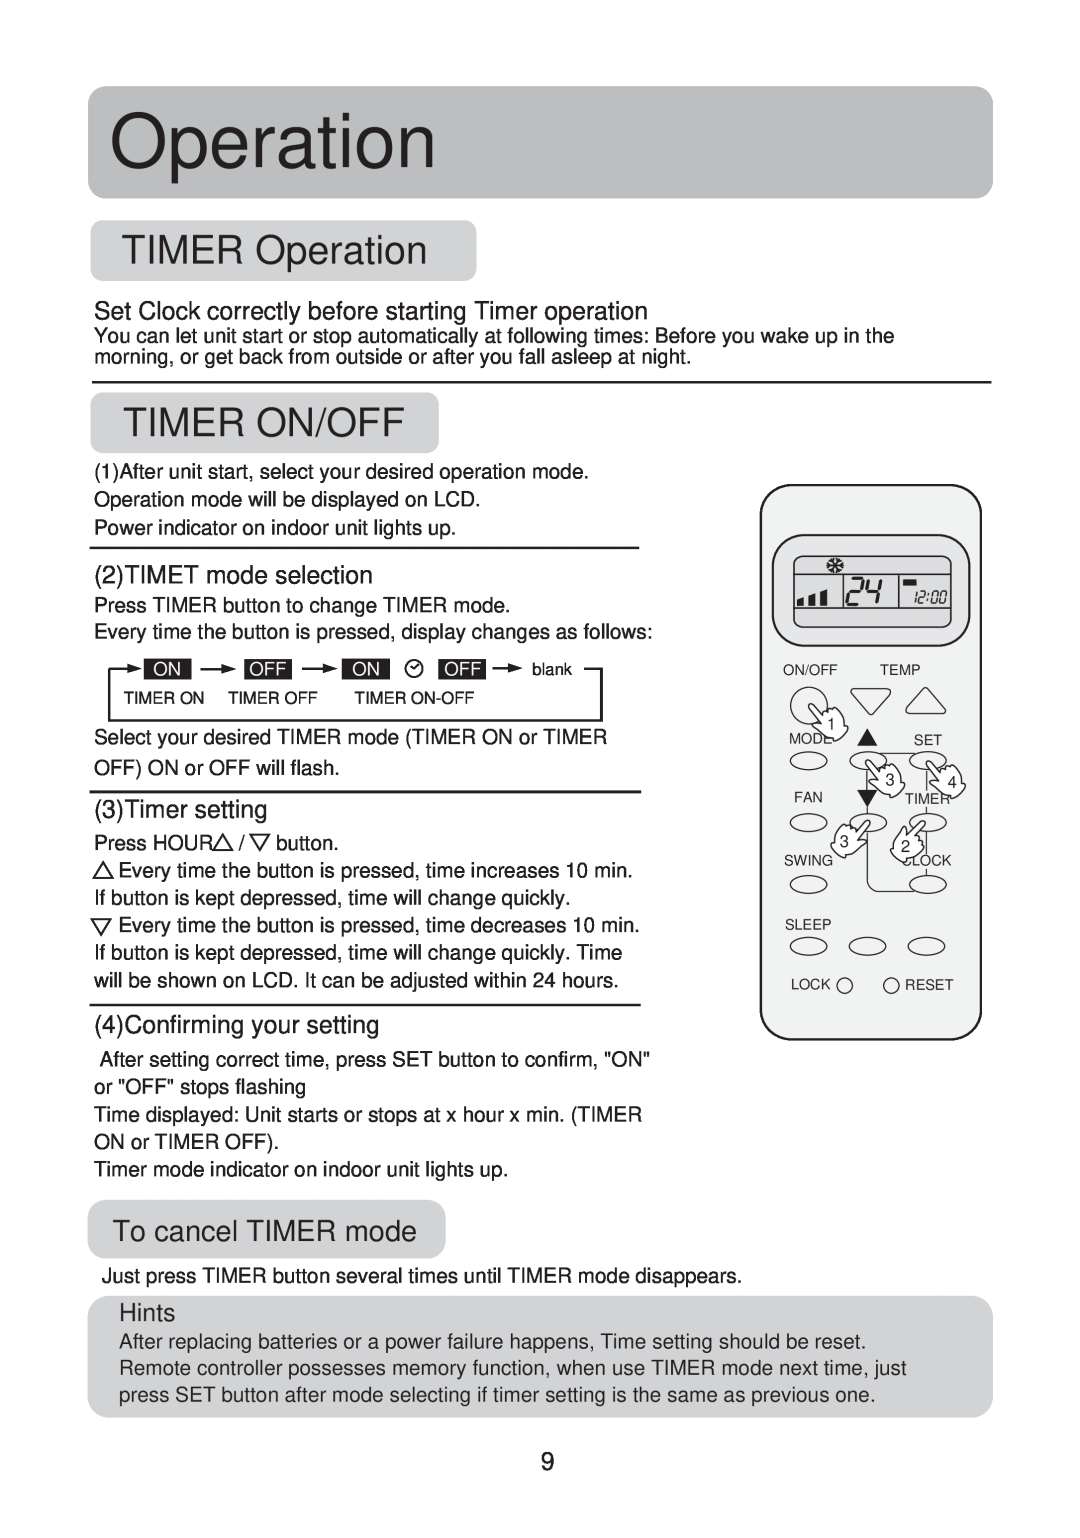 Haier No. 0010551809 TIMER Operation, Timer On/Off, To cancel TIMER mode, 2TIMET mode selection, 3Timer setting, Hints 